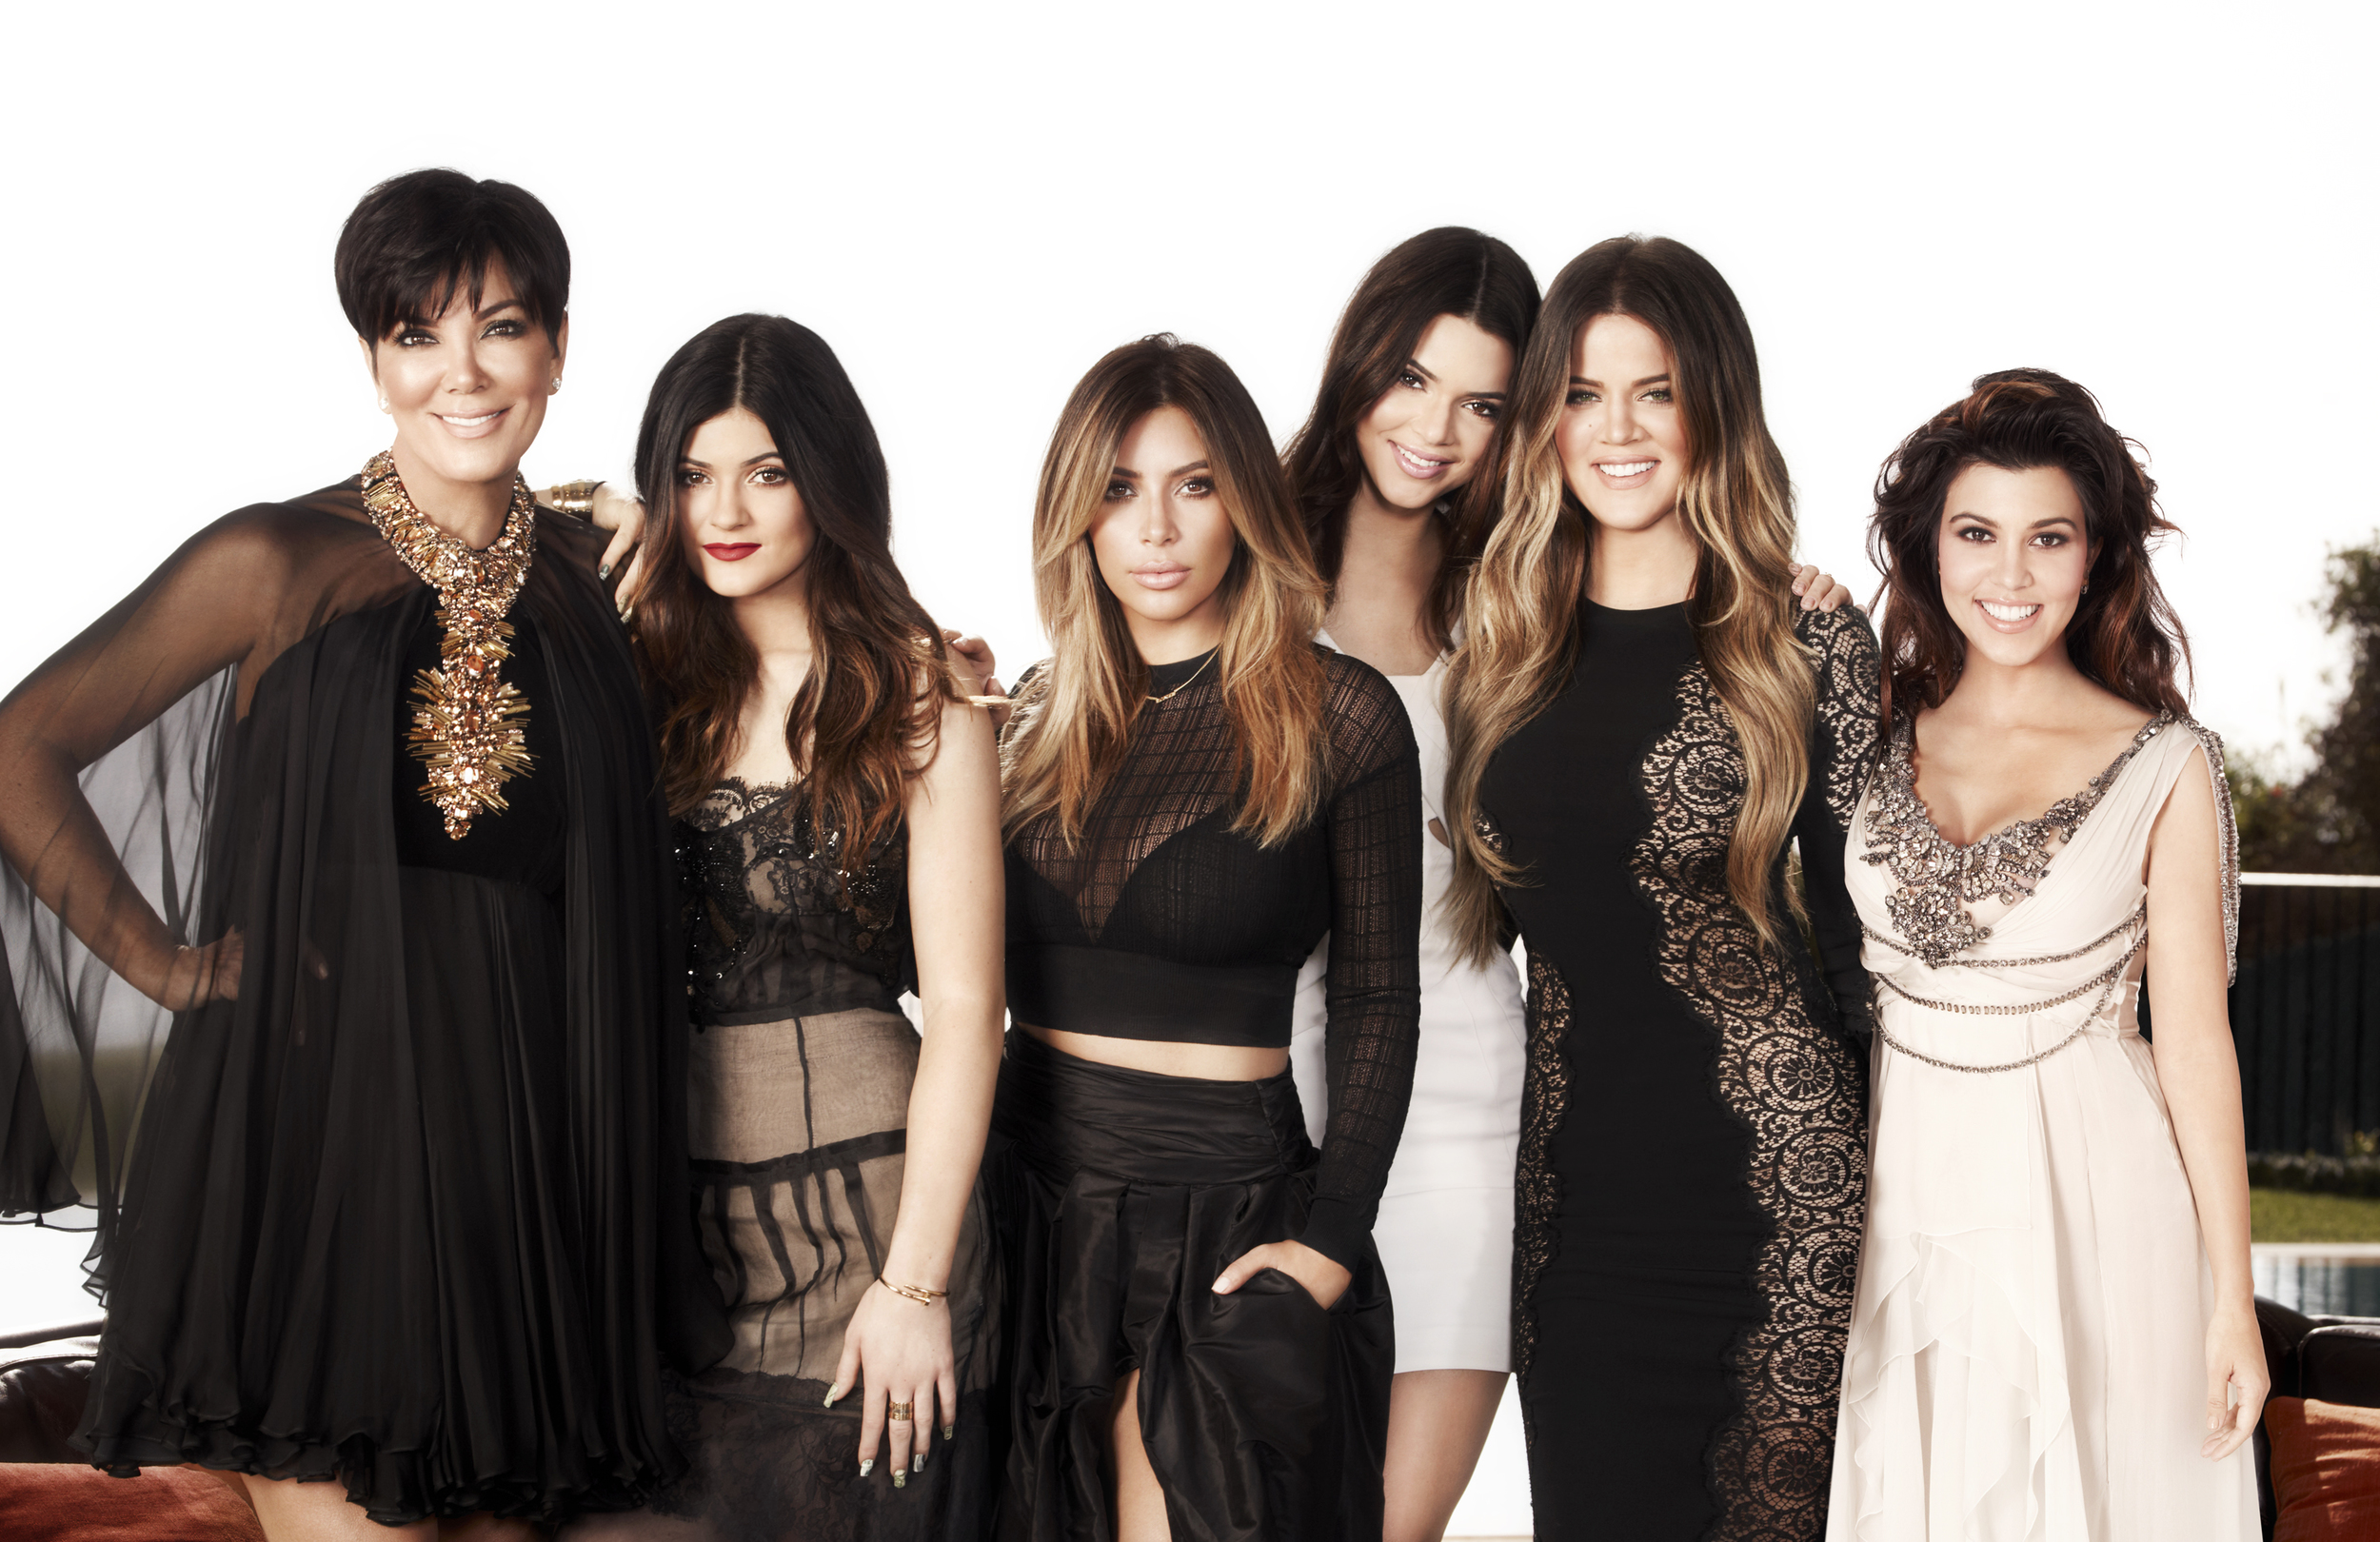   Keeping Up With The Kardashians returning to E!  image - supplied 